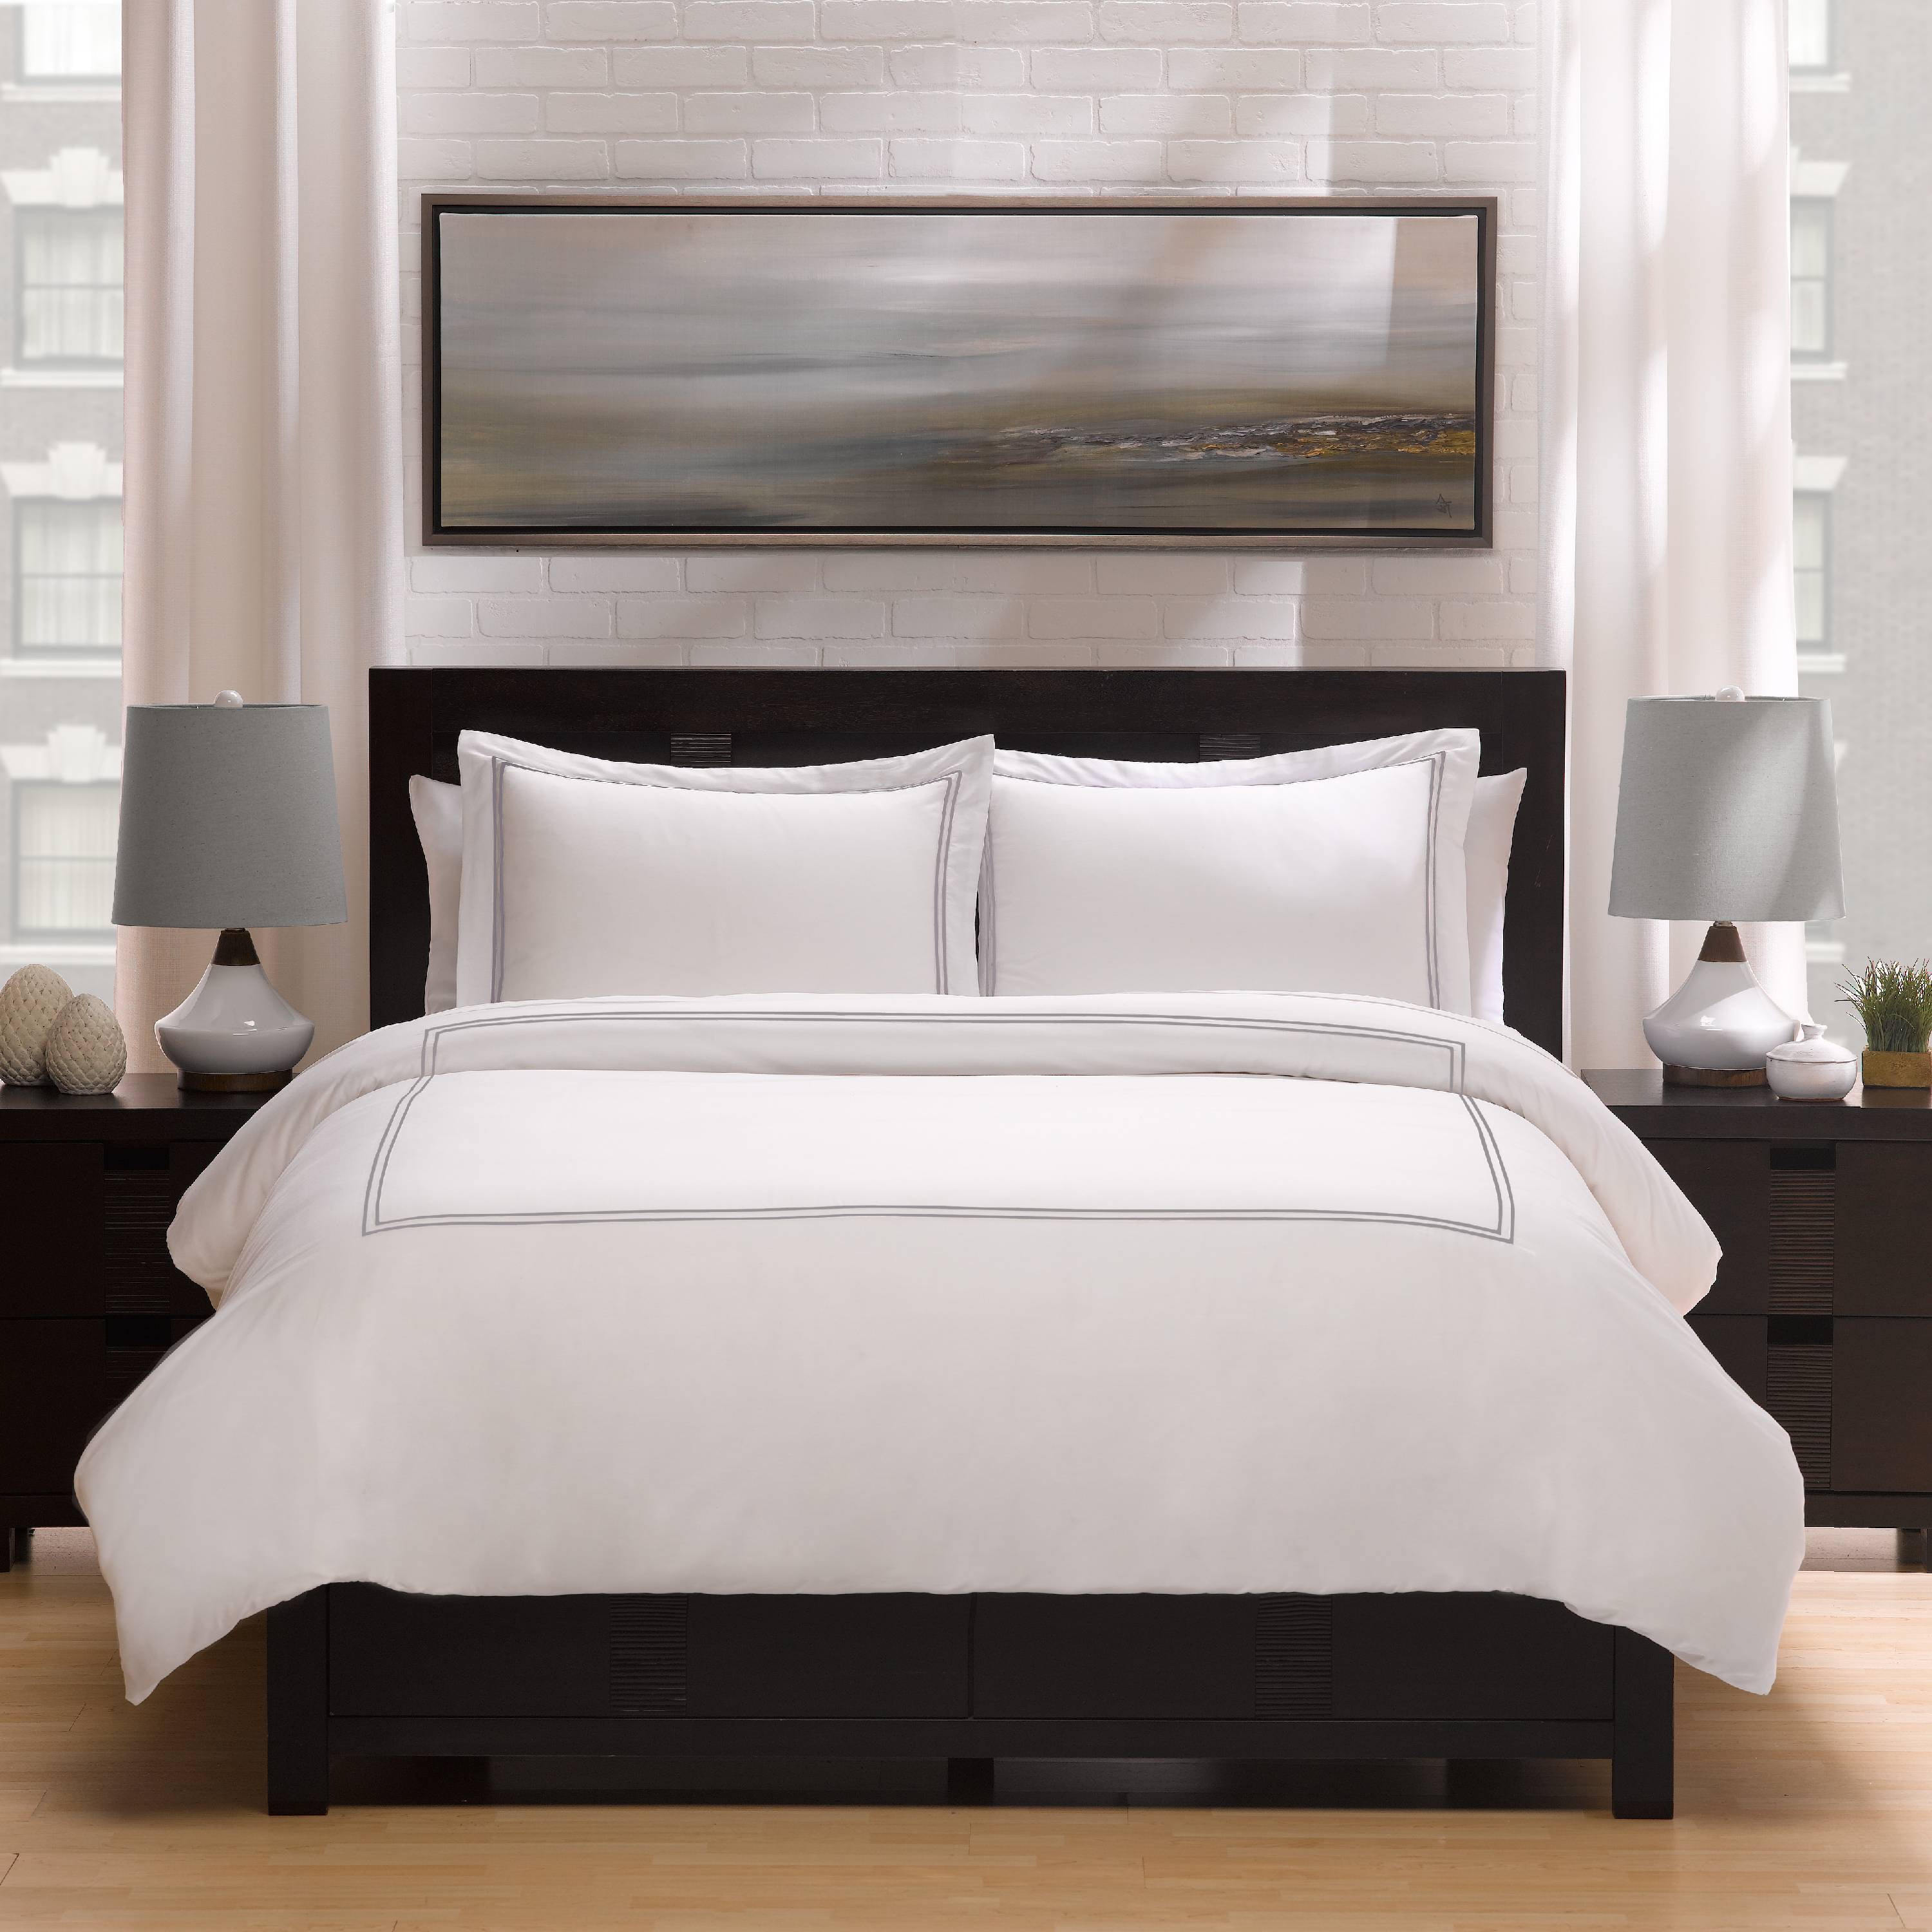 Hotel quality bed linen sale